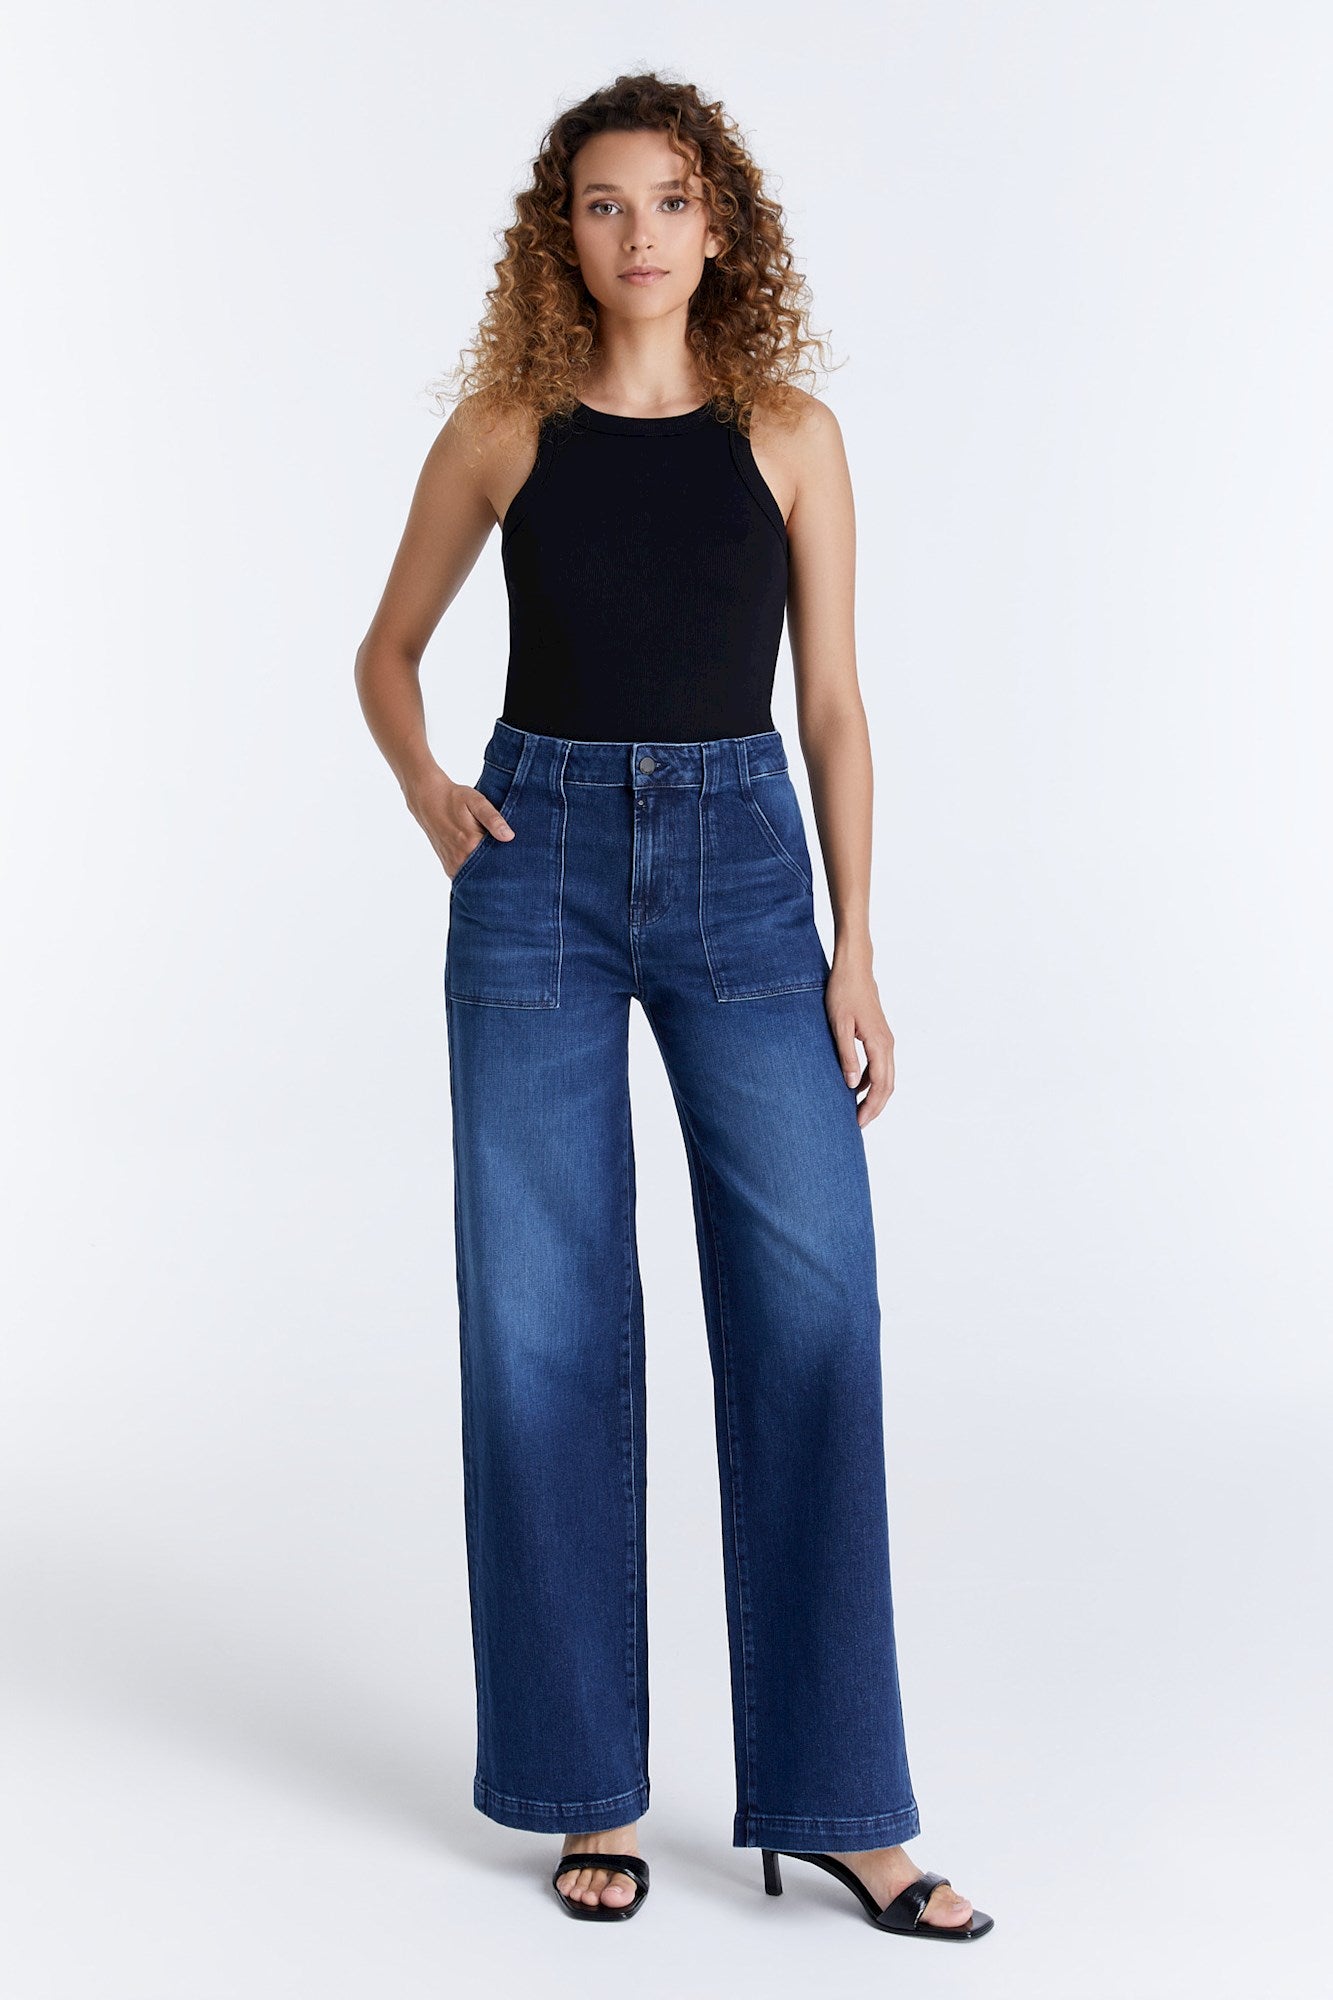 Lulu – Baggy-Jeans mit hoher Taille – Dunkelblau